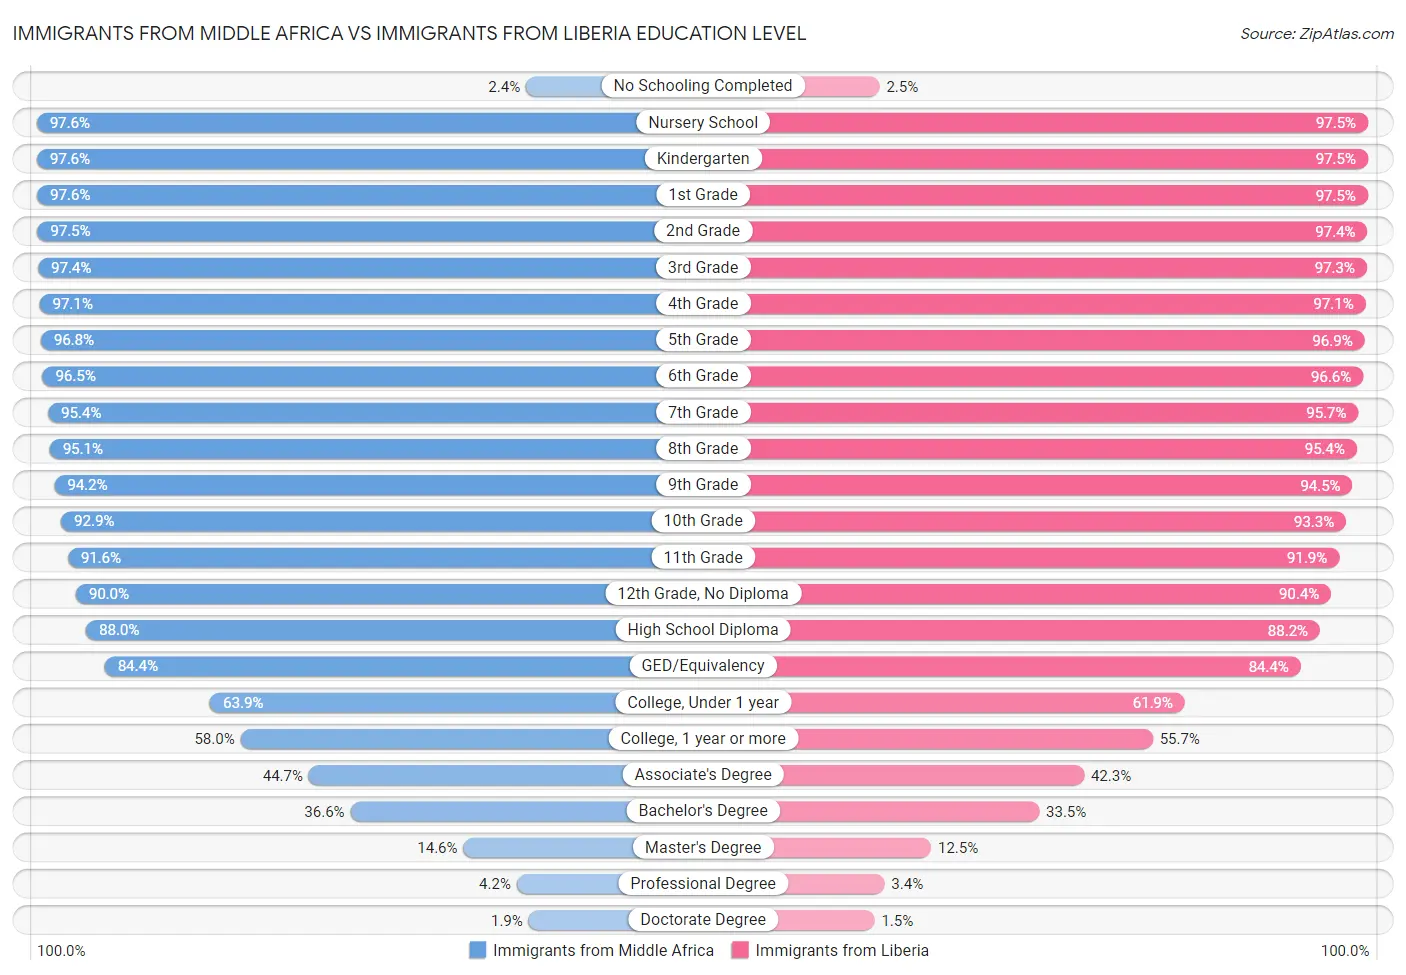 Immigrants from Middle Africa vs Immigrants from Liberia Education Level